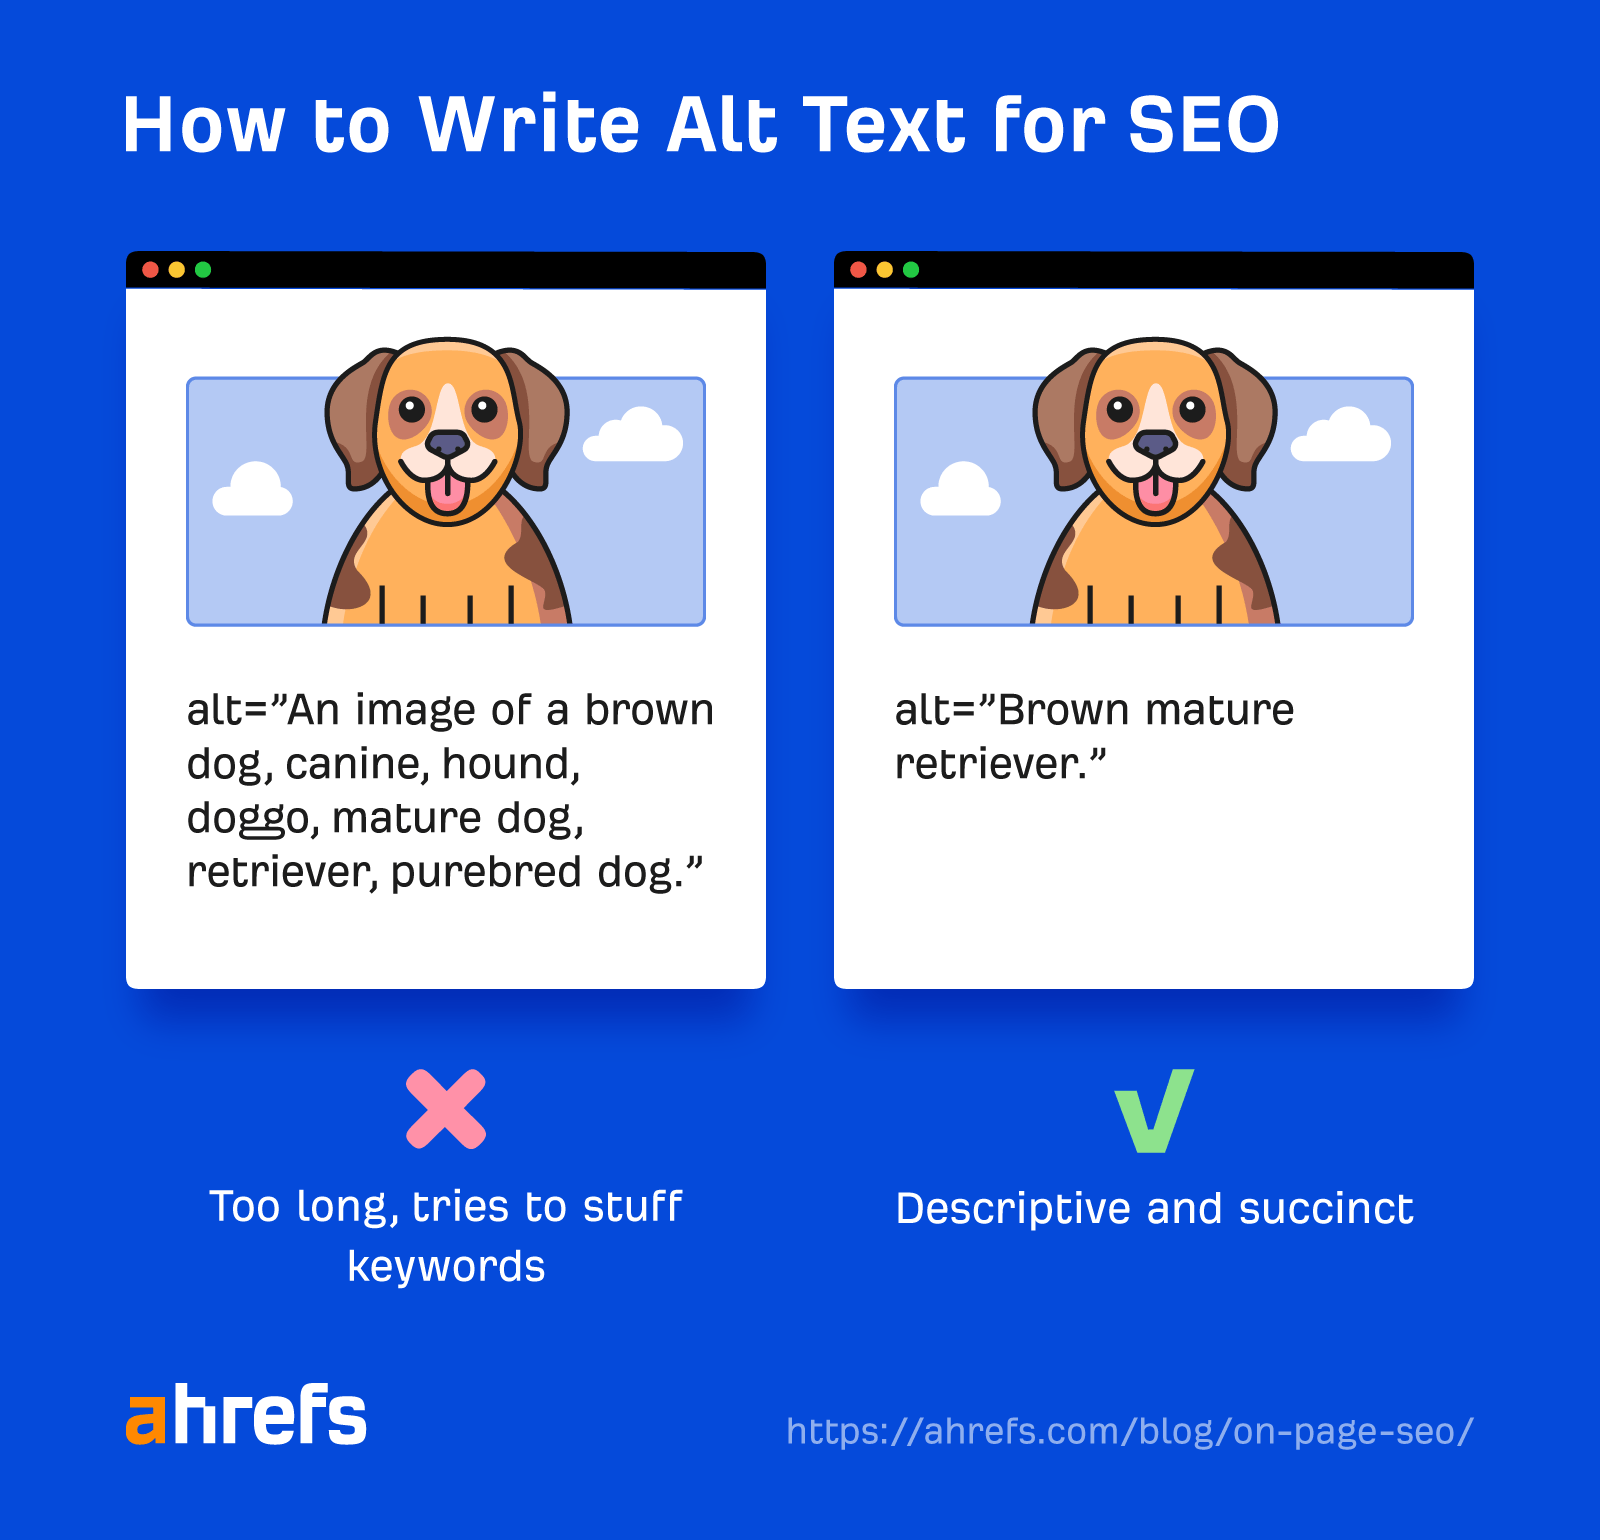 How to write alt text for SEO